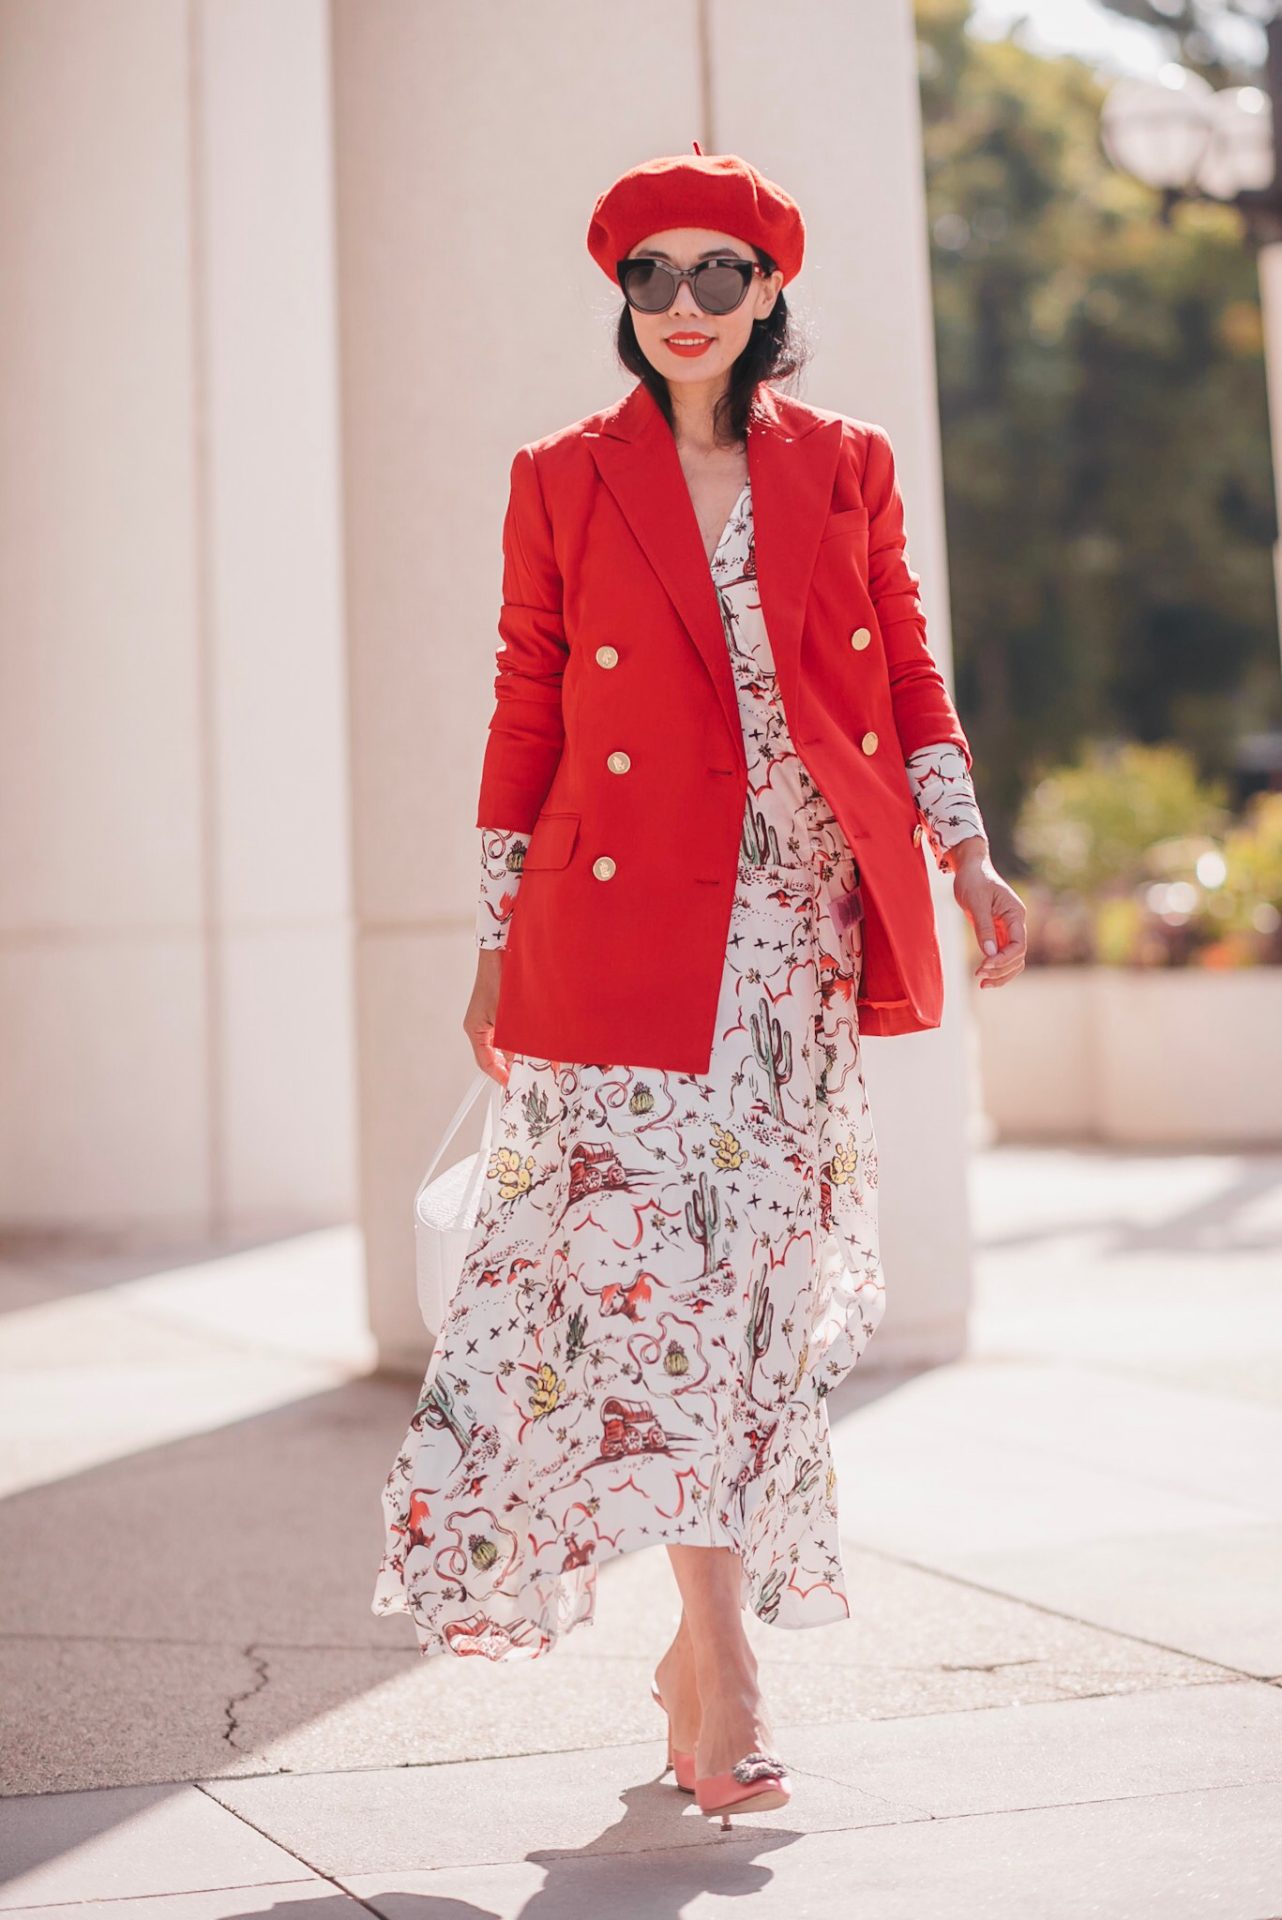 Fall Style, Fall Fashion, Double Breasted Blazer, Red Beret, Long Dress